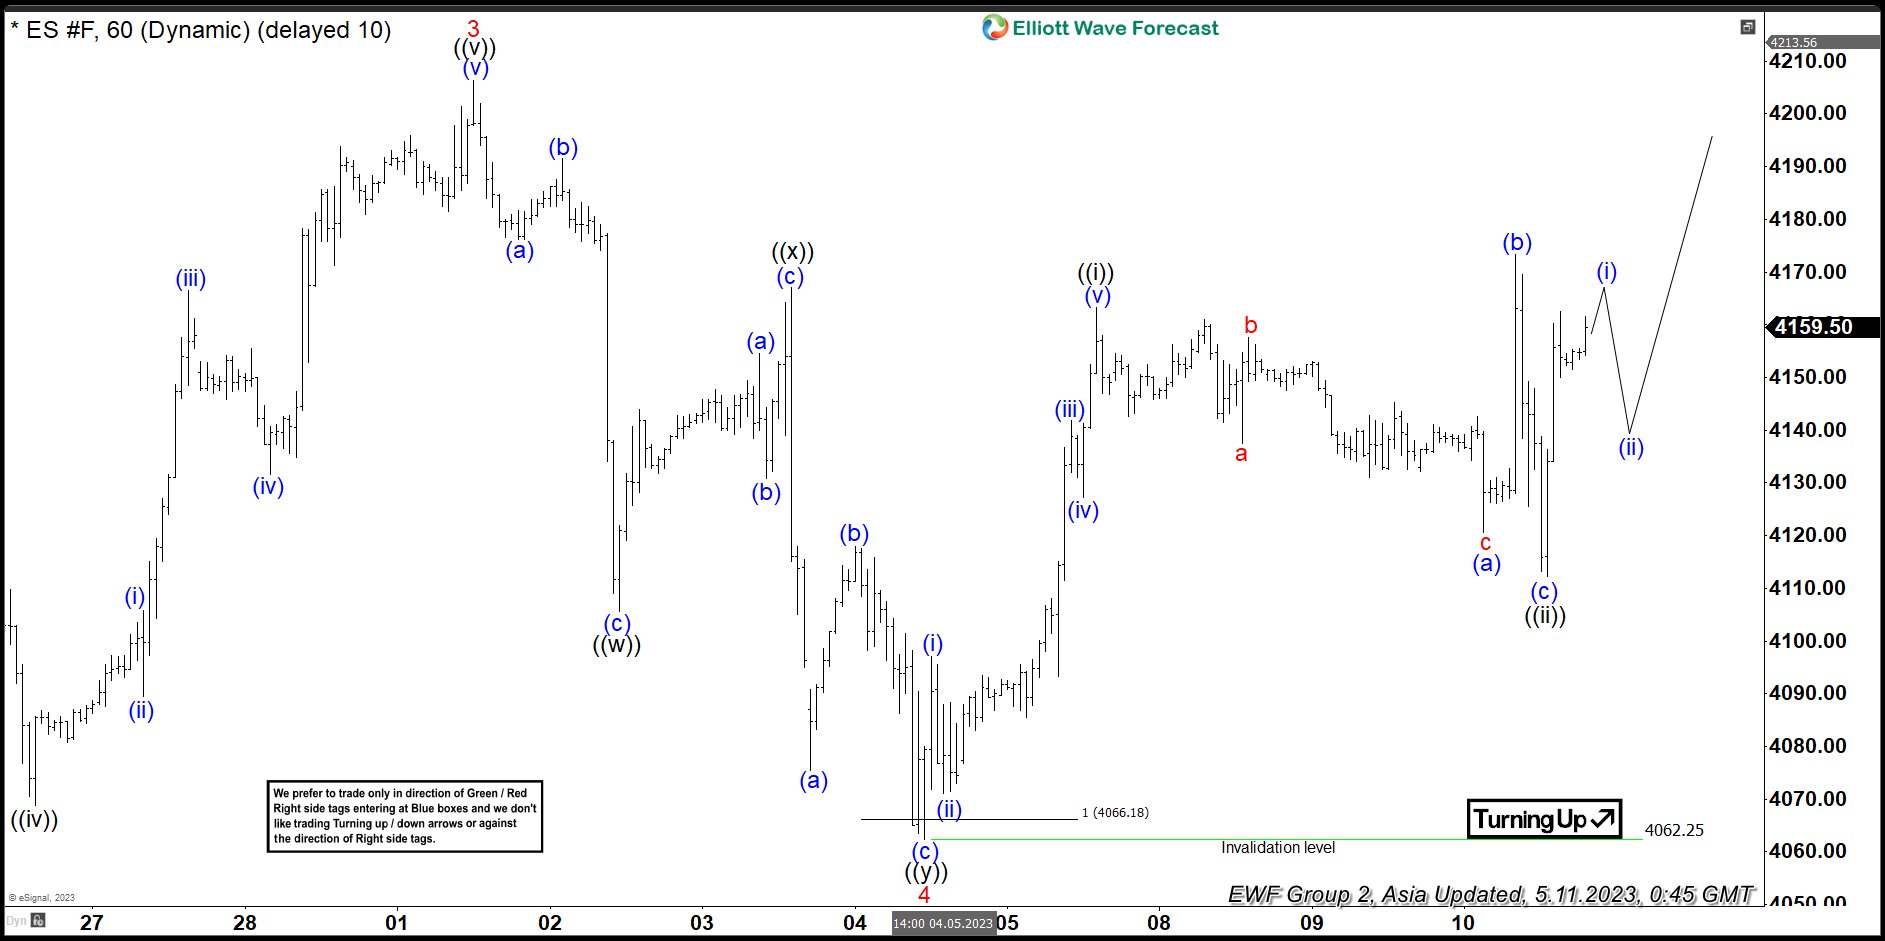 Elliott Wave Outlook: S&P-500 E-Mini (ES) Looking to Extend Higher